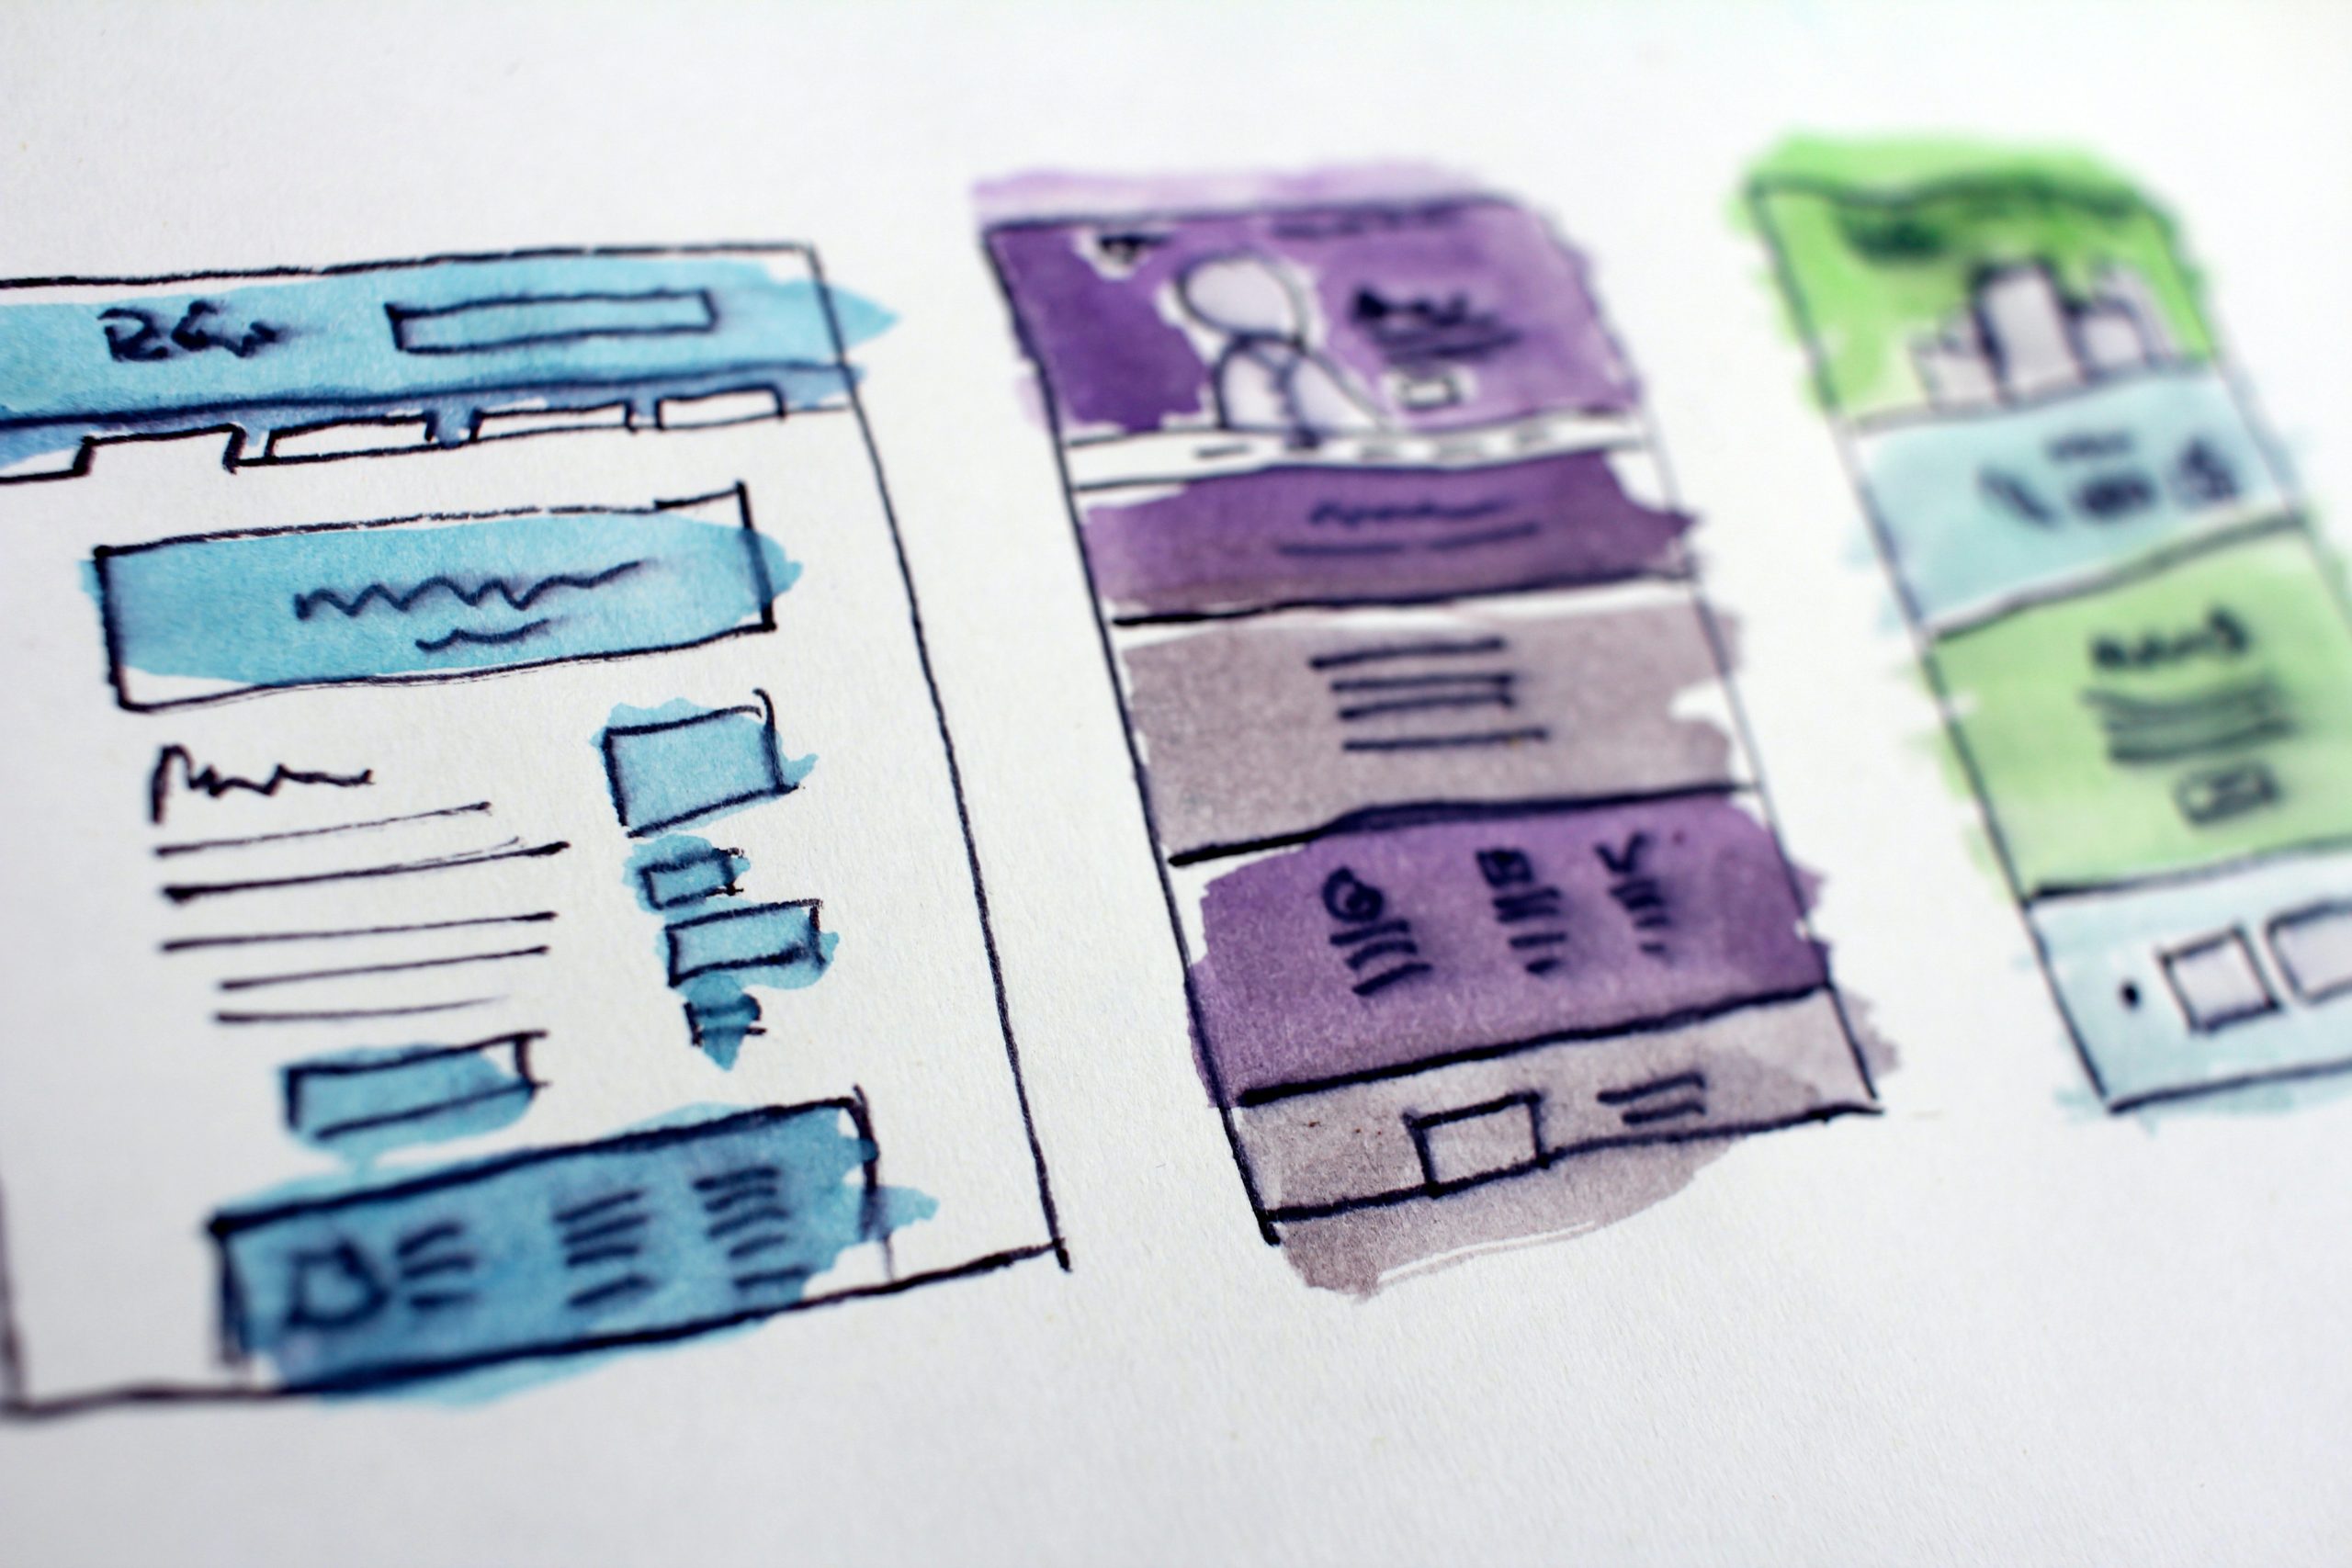 Blue, purple, and green watercolour sketches of a mobile app user interface design